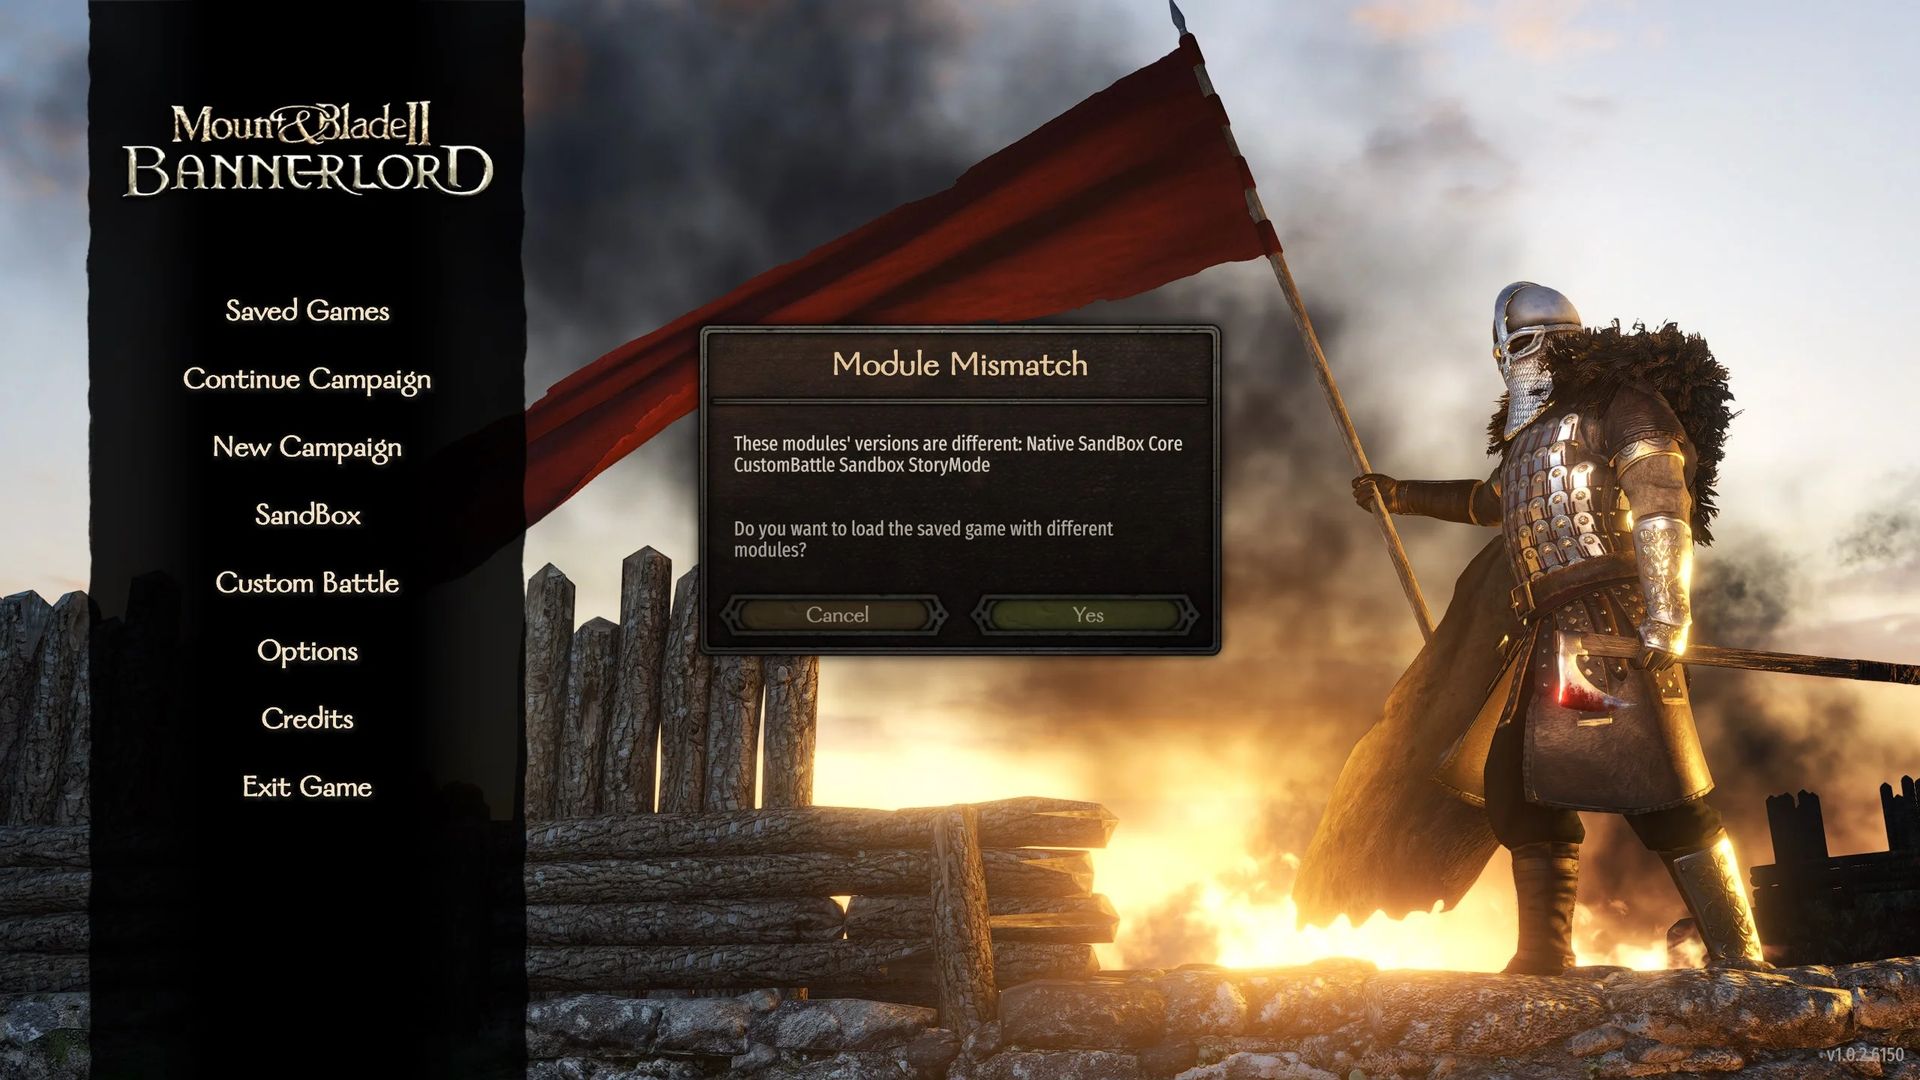 The Bannerlord module mismatch error message comes up when players try to open an old game save